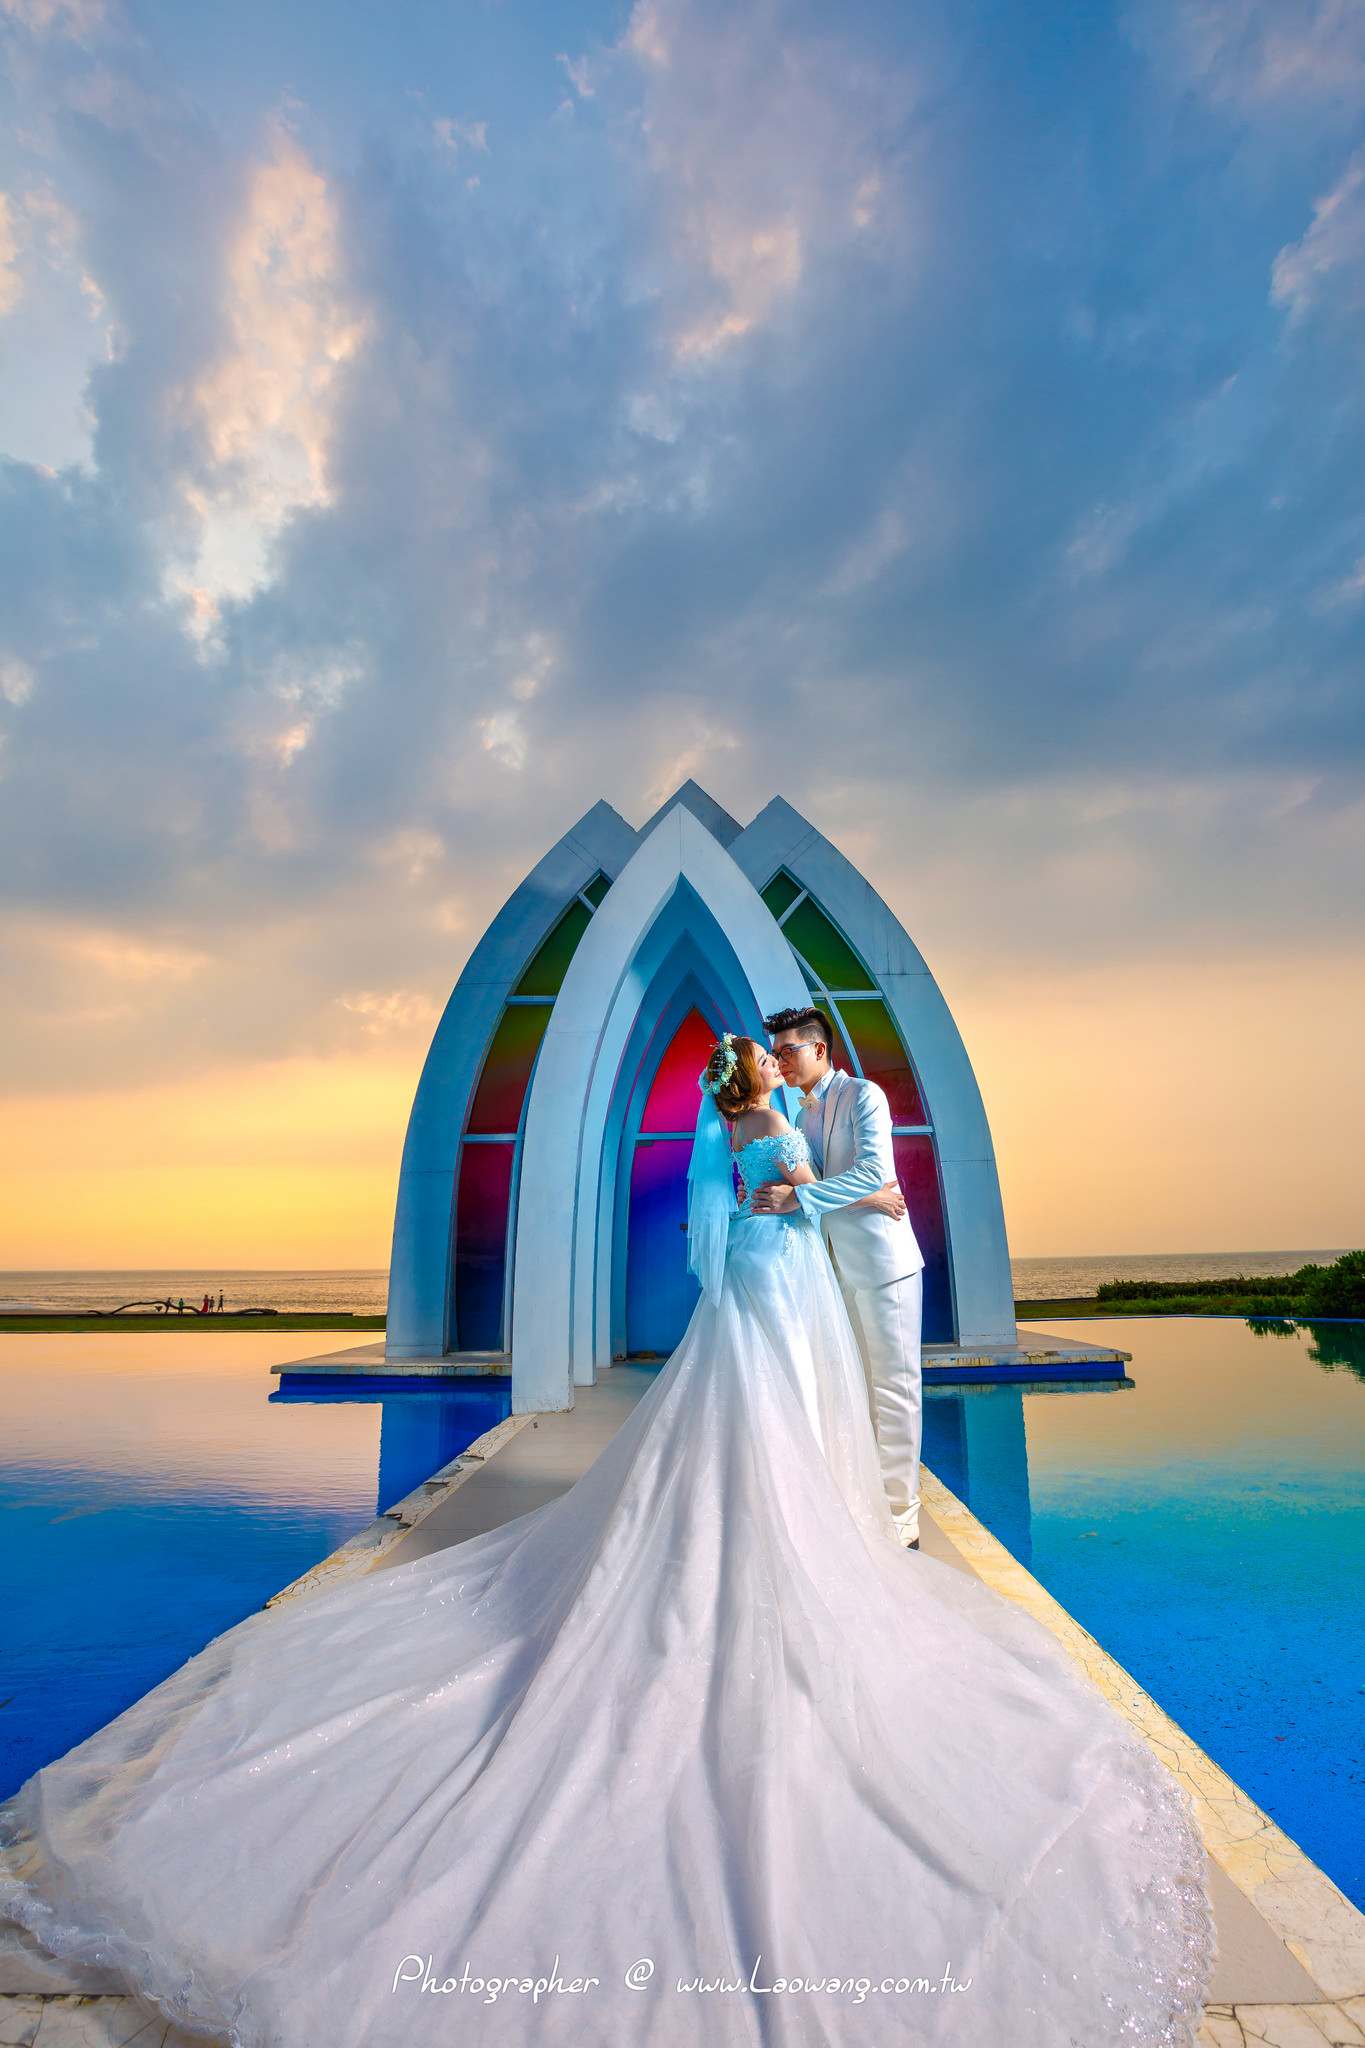 wedding photography14 The Best Wedding Photography Ideas by Lao Wang